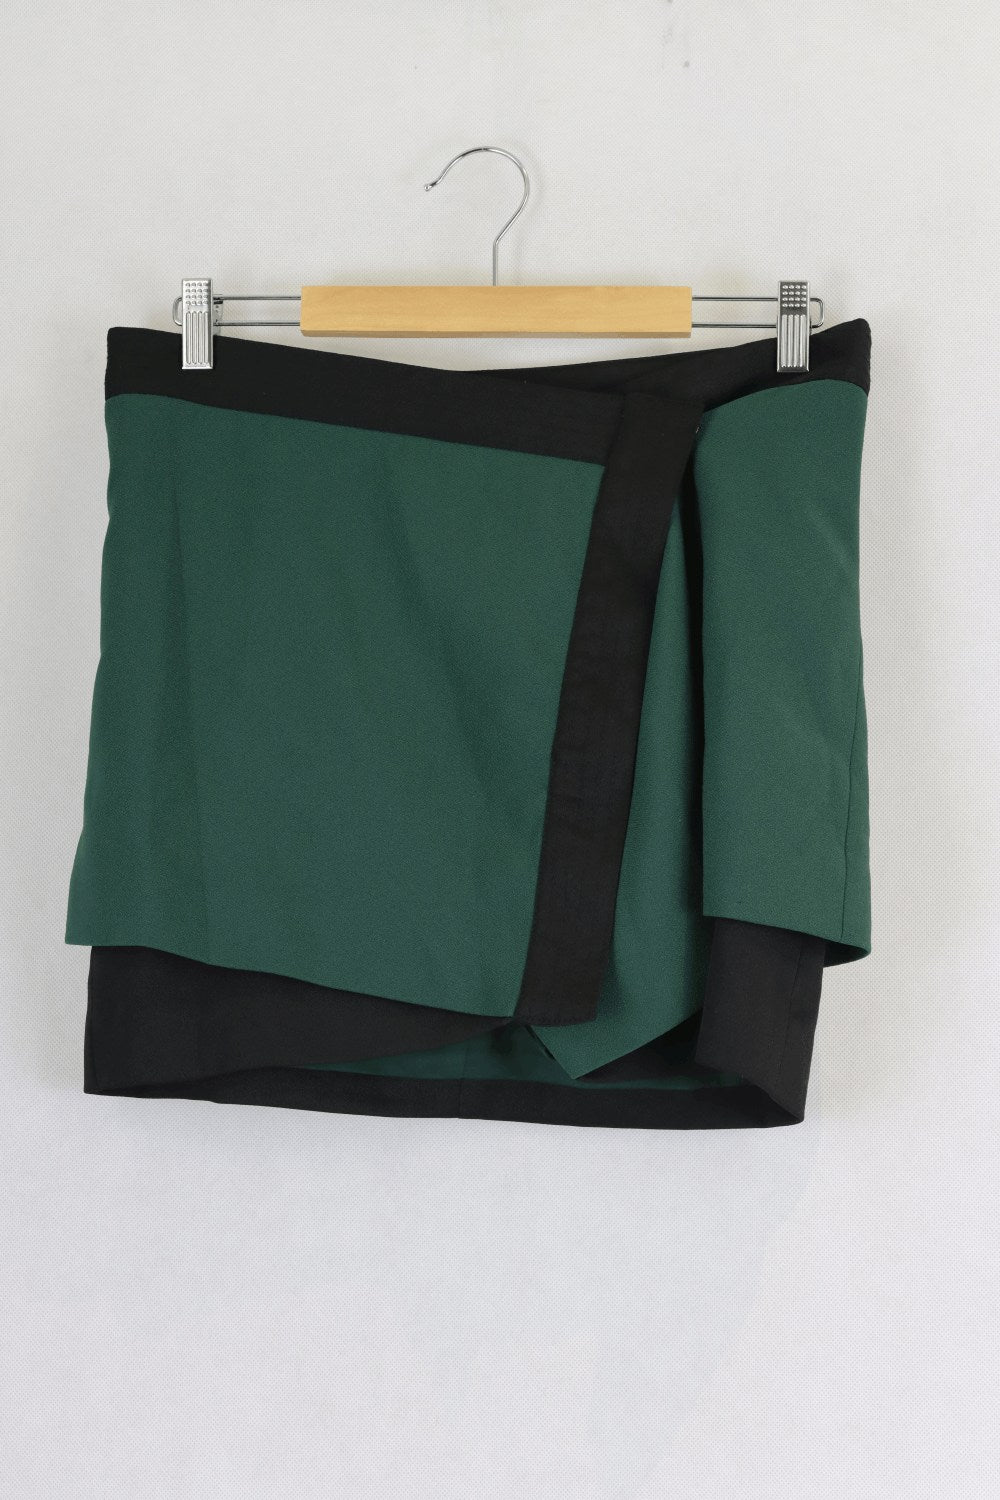 Finders Keepers Skirt Green And Black 8